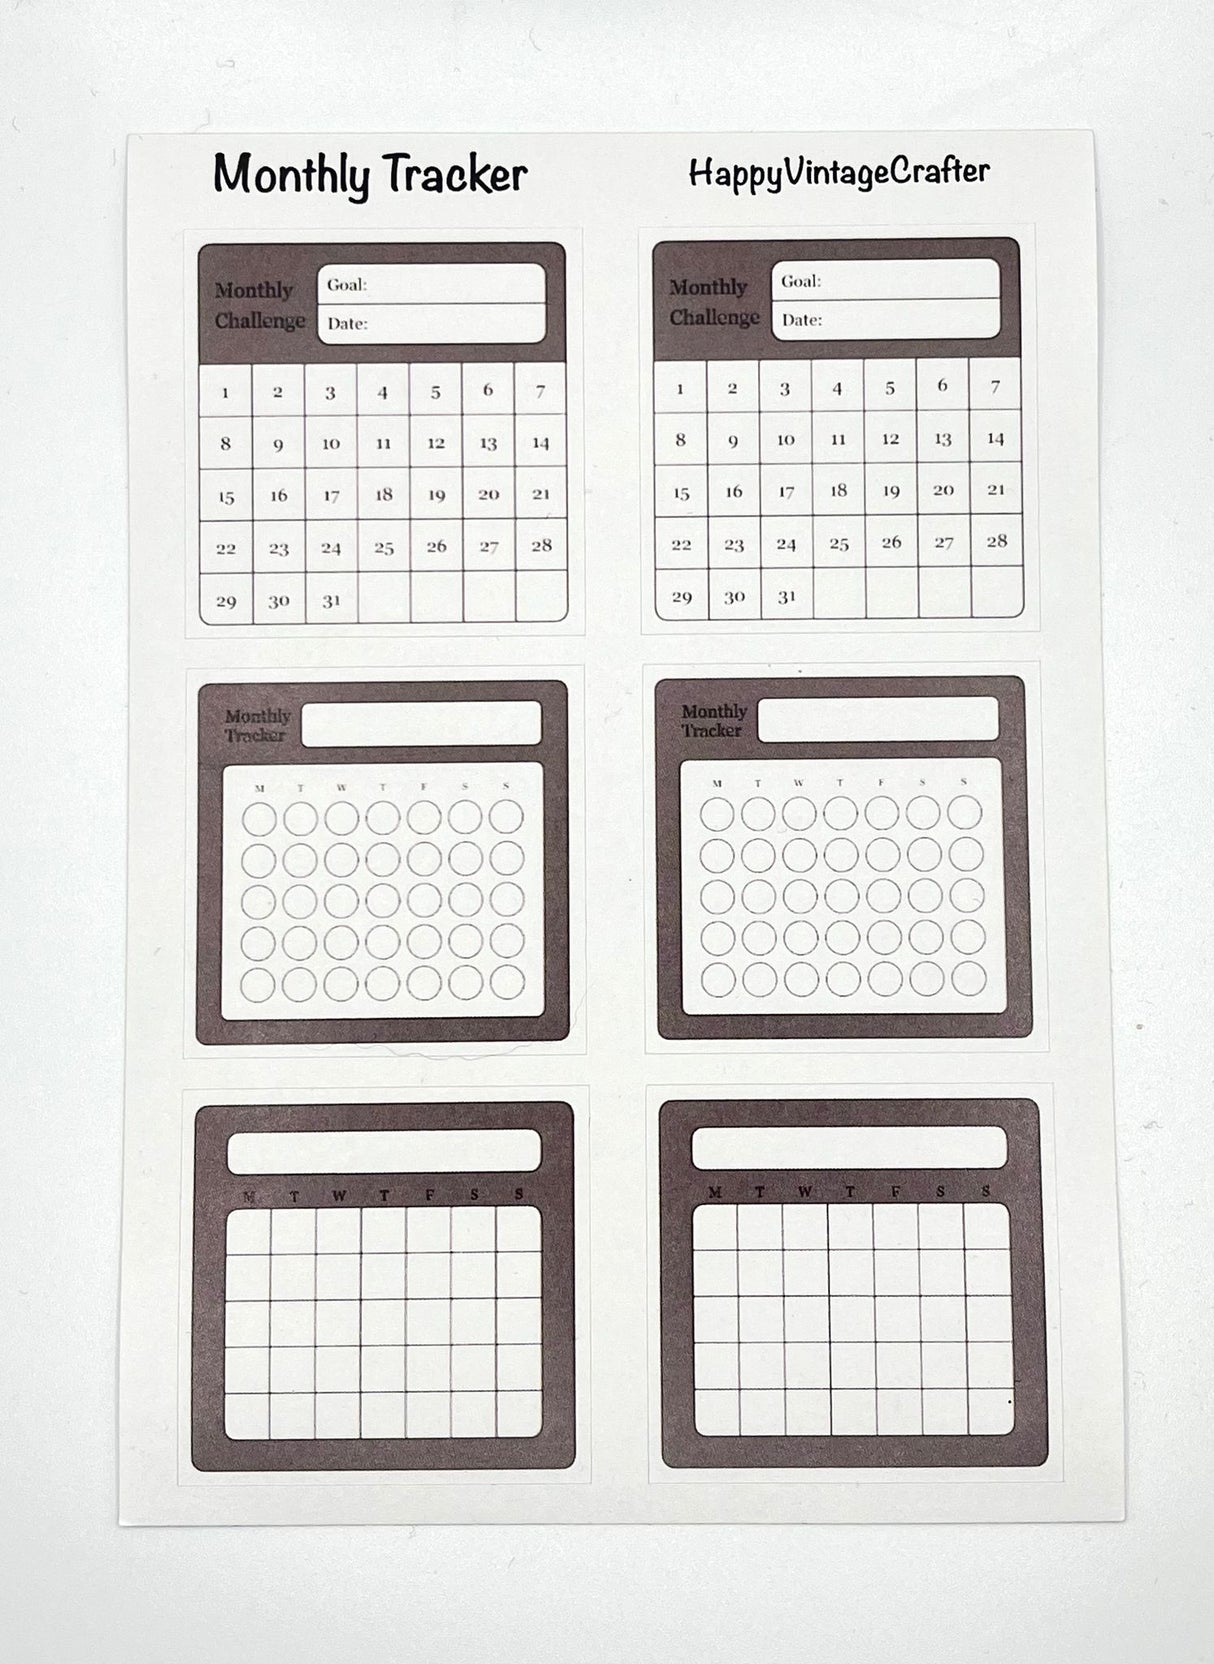 HappyVintageCrafter - Writable Paper Stickers - Tracker -  Brown